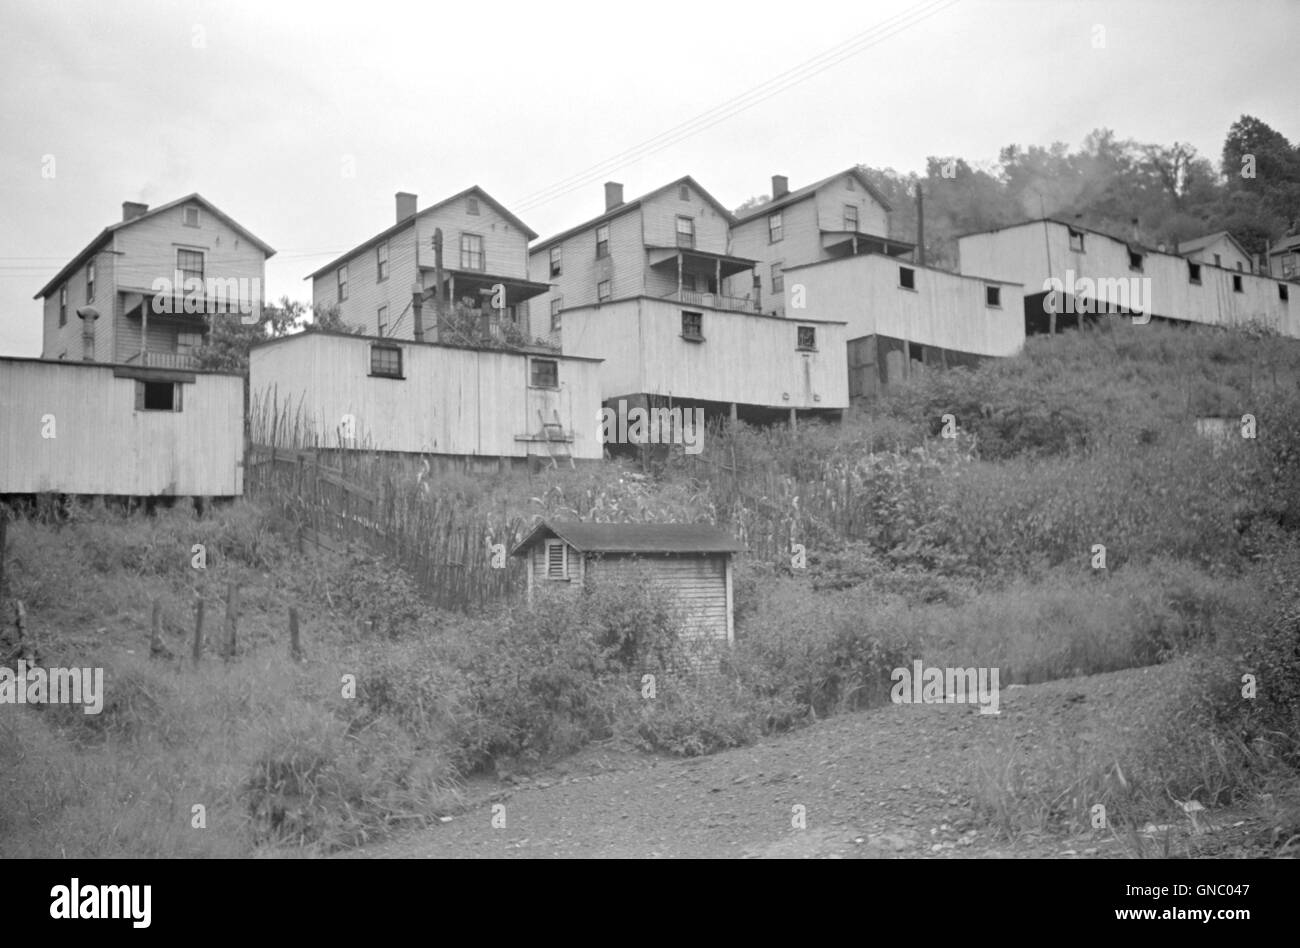 Coal Mining Company's Houses and Shacks, Pursglove, West Virginia, USA, Marion Post Wolcott for Farm Security Administration, September 1938 Stock Photo